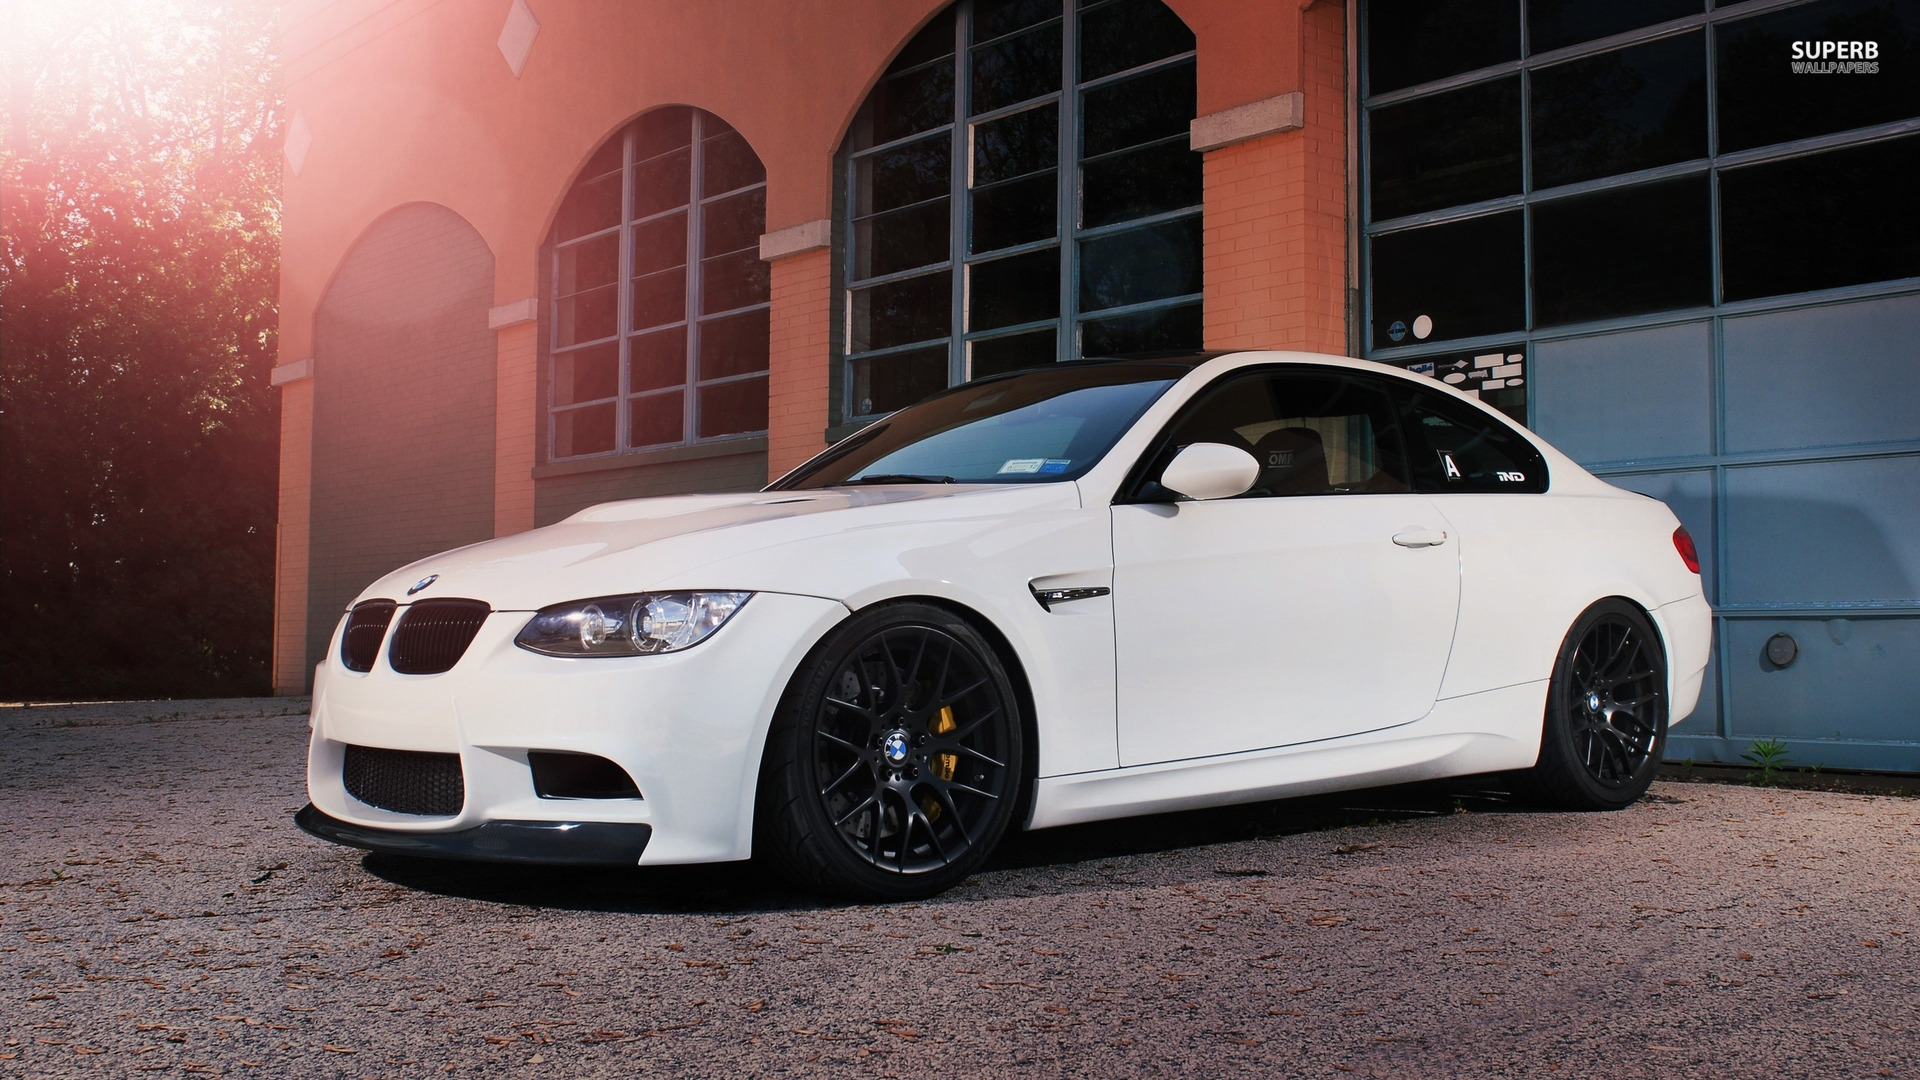 Bmw m3 In HD Wallpaper Home Design and Cars HD Wallpaper